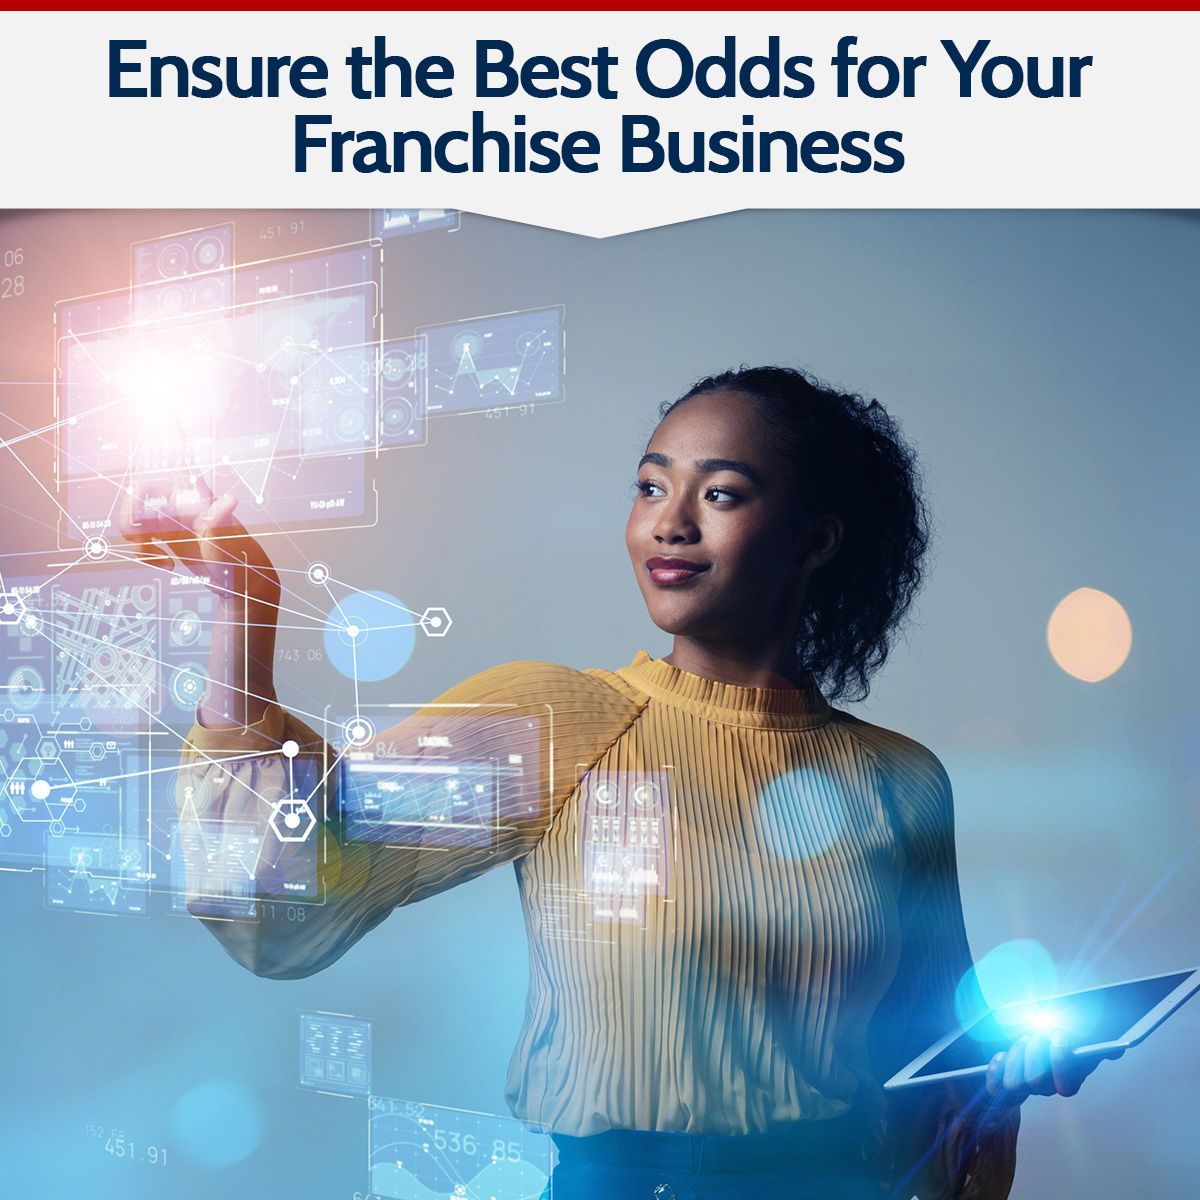 Ensure the Best Odds for Your Franchise Business